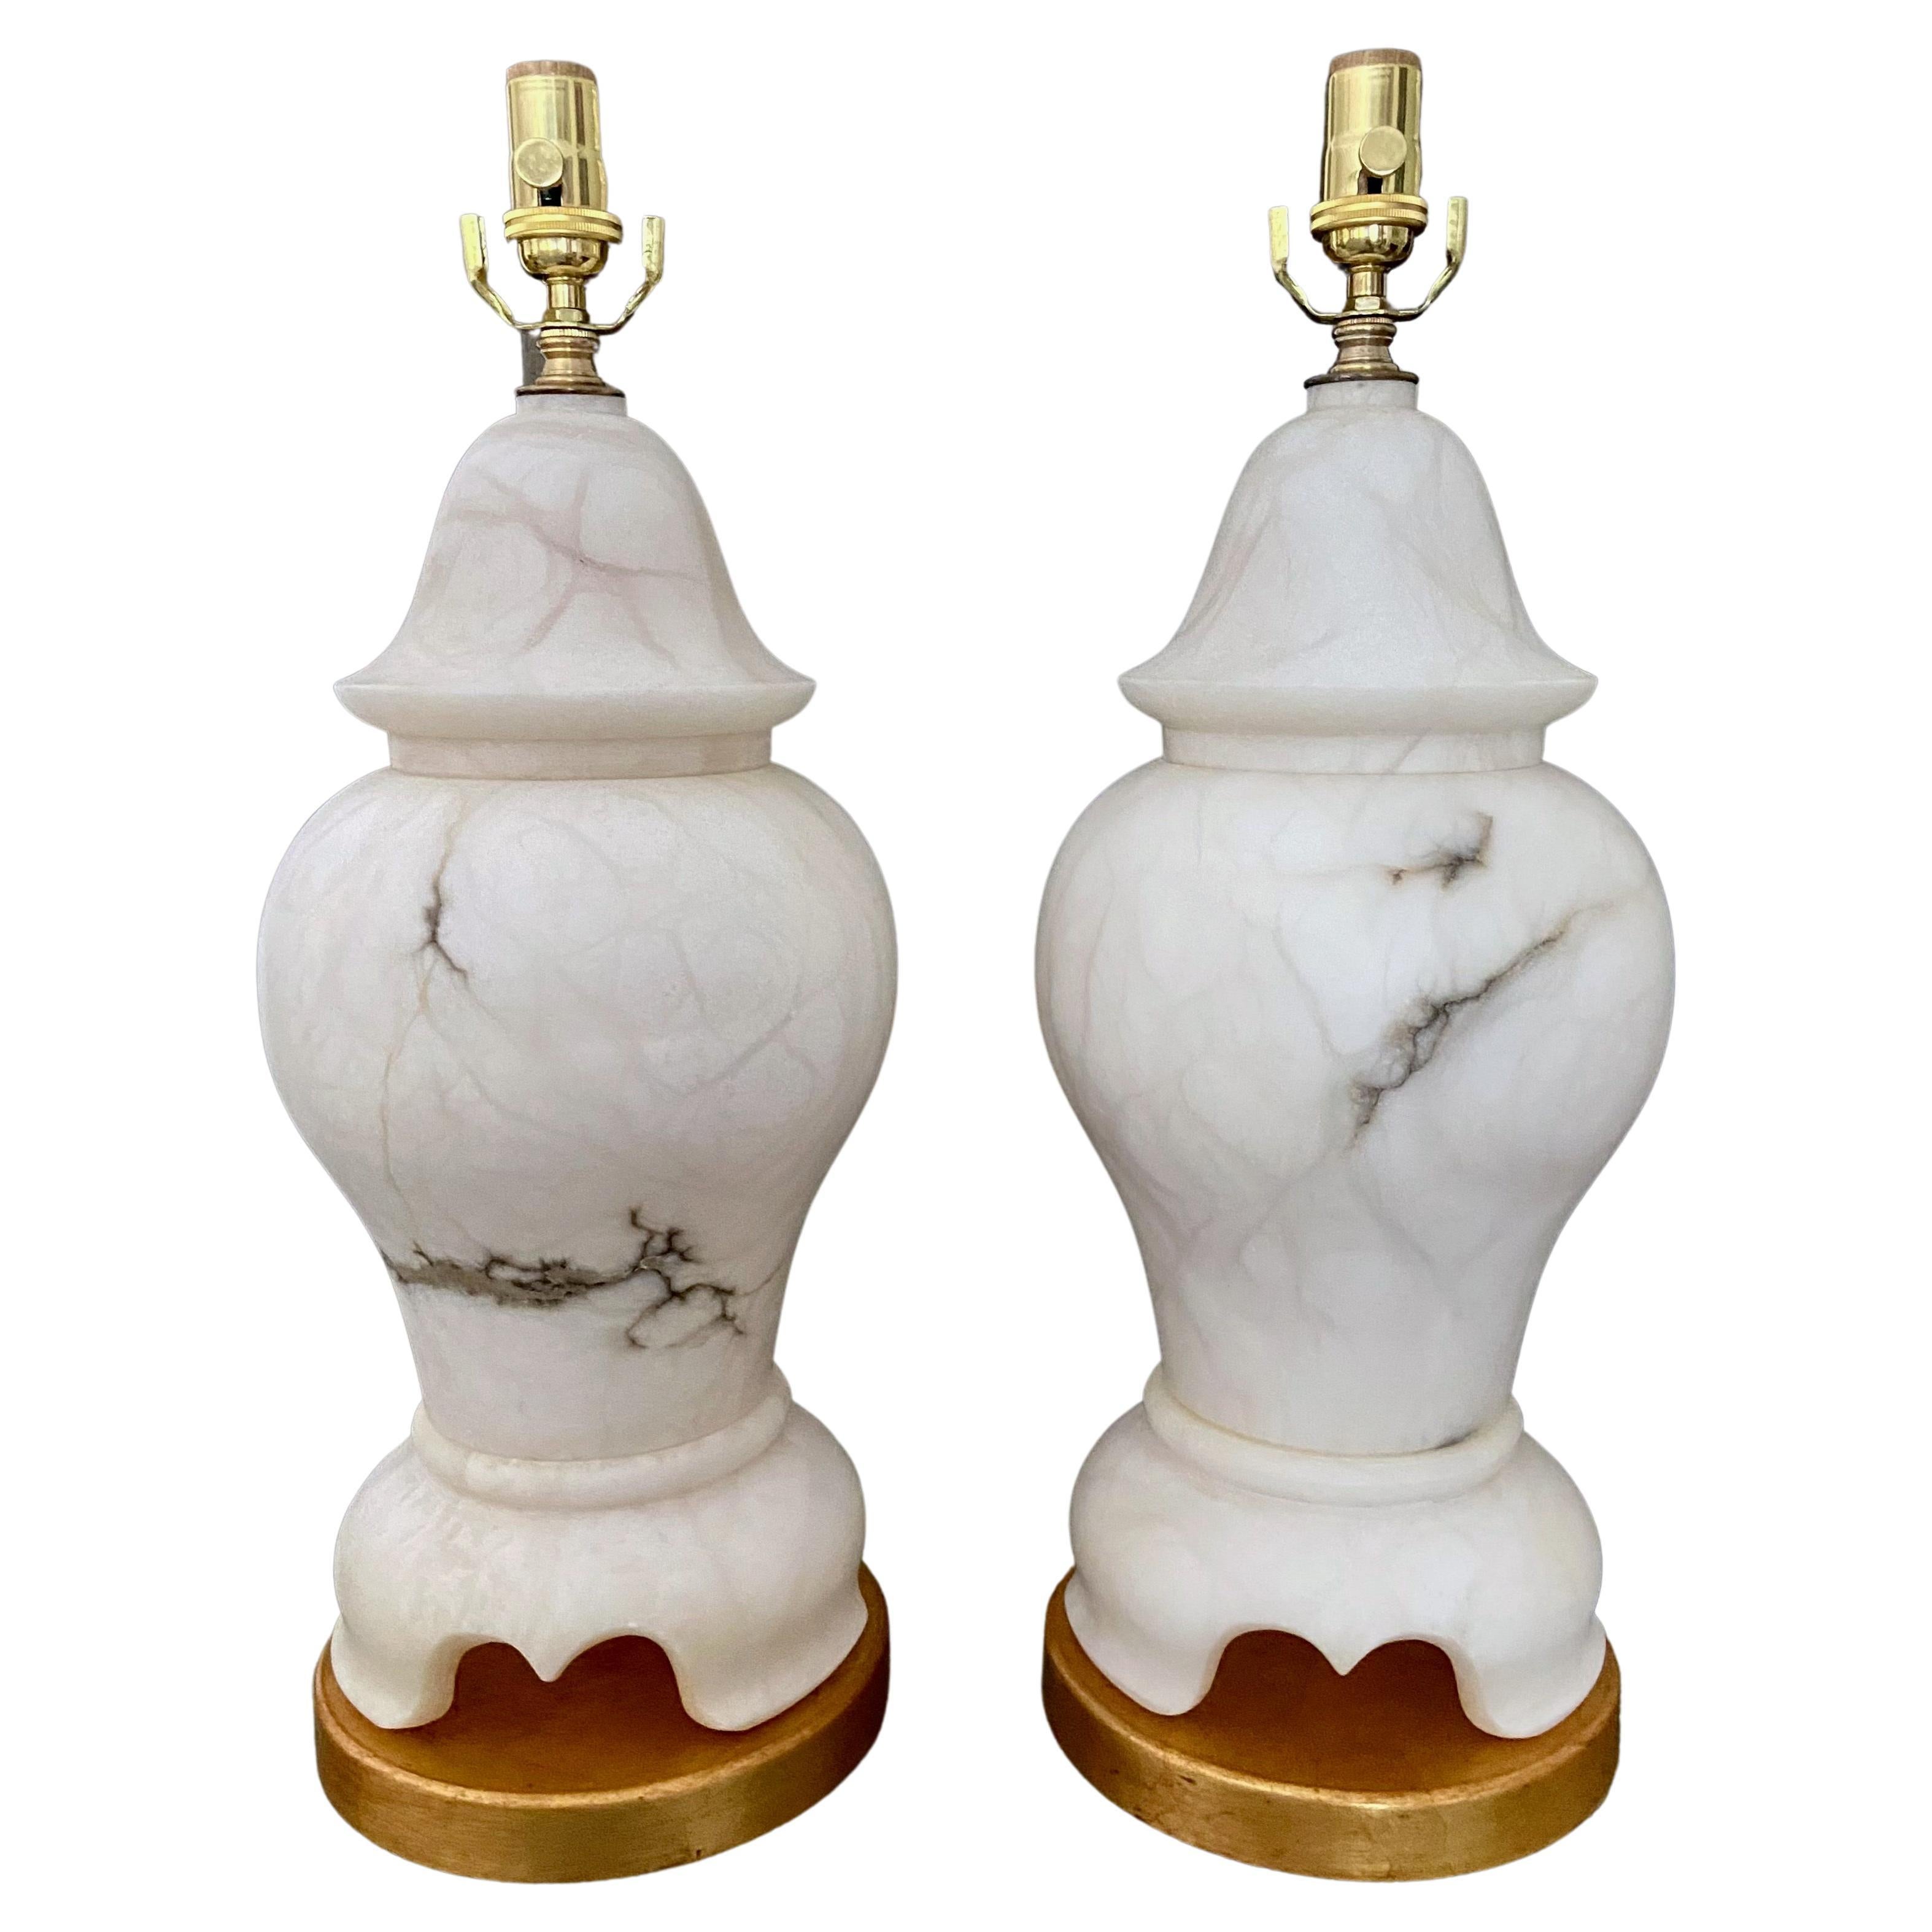 Pair of lidded urn form alabaster table lamps with brass fittings mounted on giltwood bases. Heavy and expertly constructed. Newly rewired with 3 way sockets and rayon covered cords. Included are alabaster finials for shades. Overall height top of